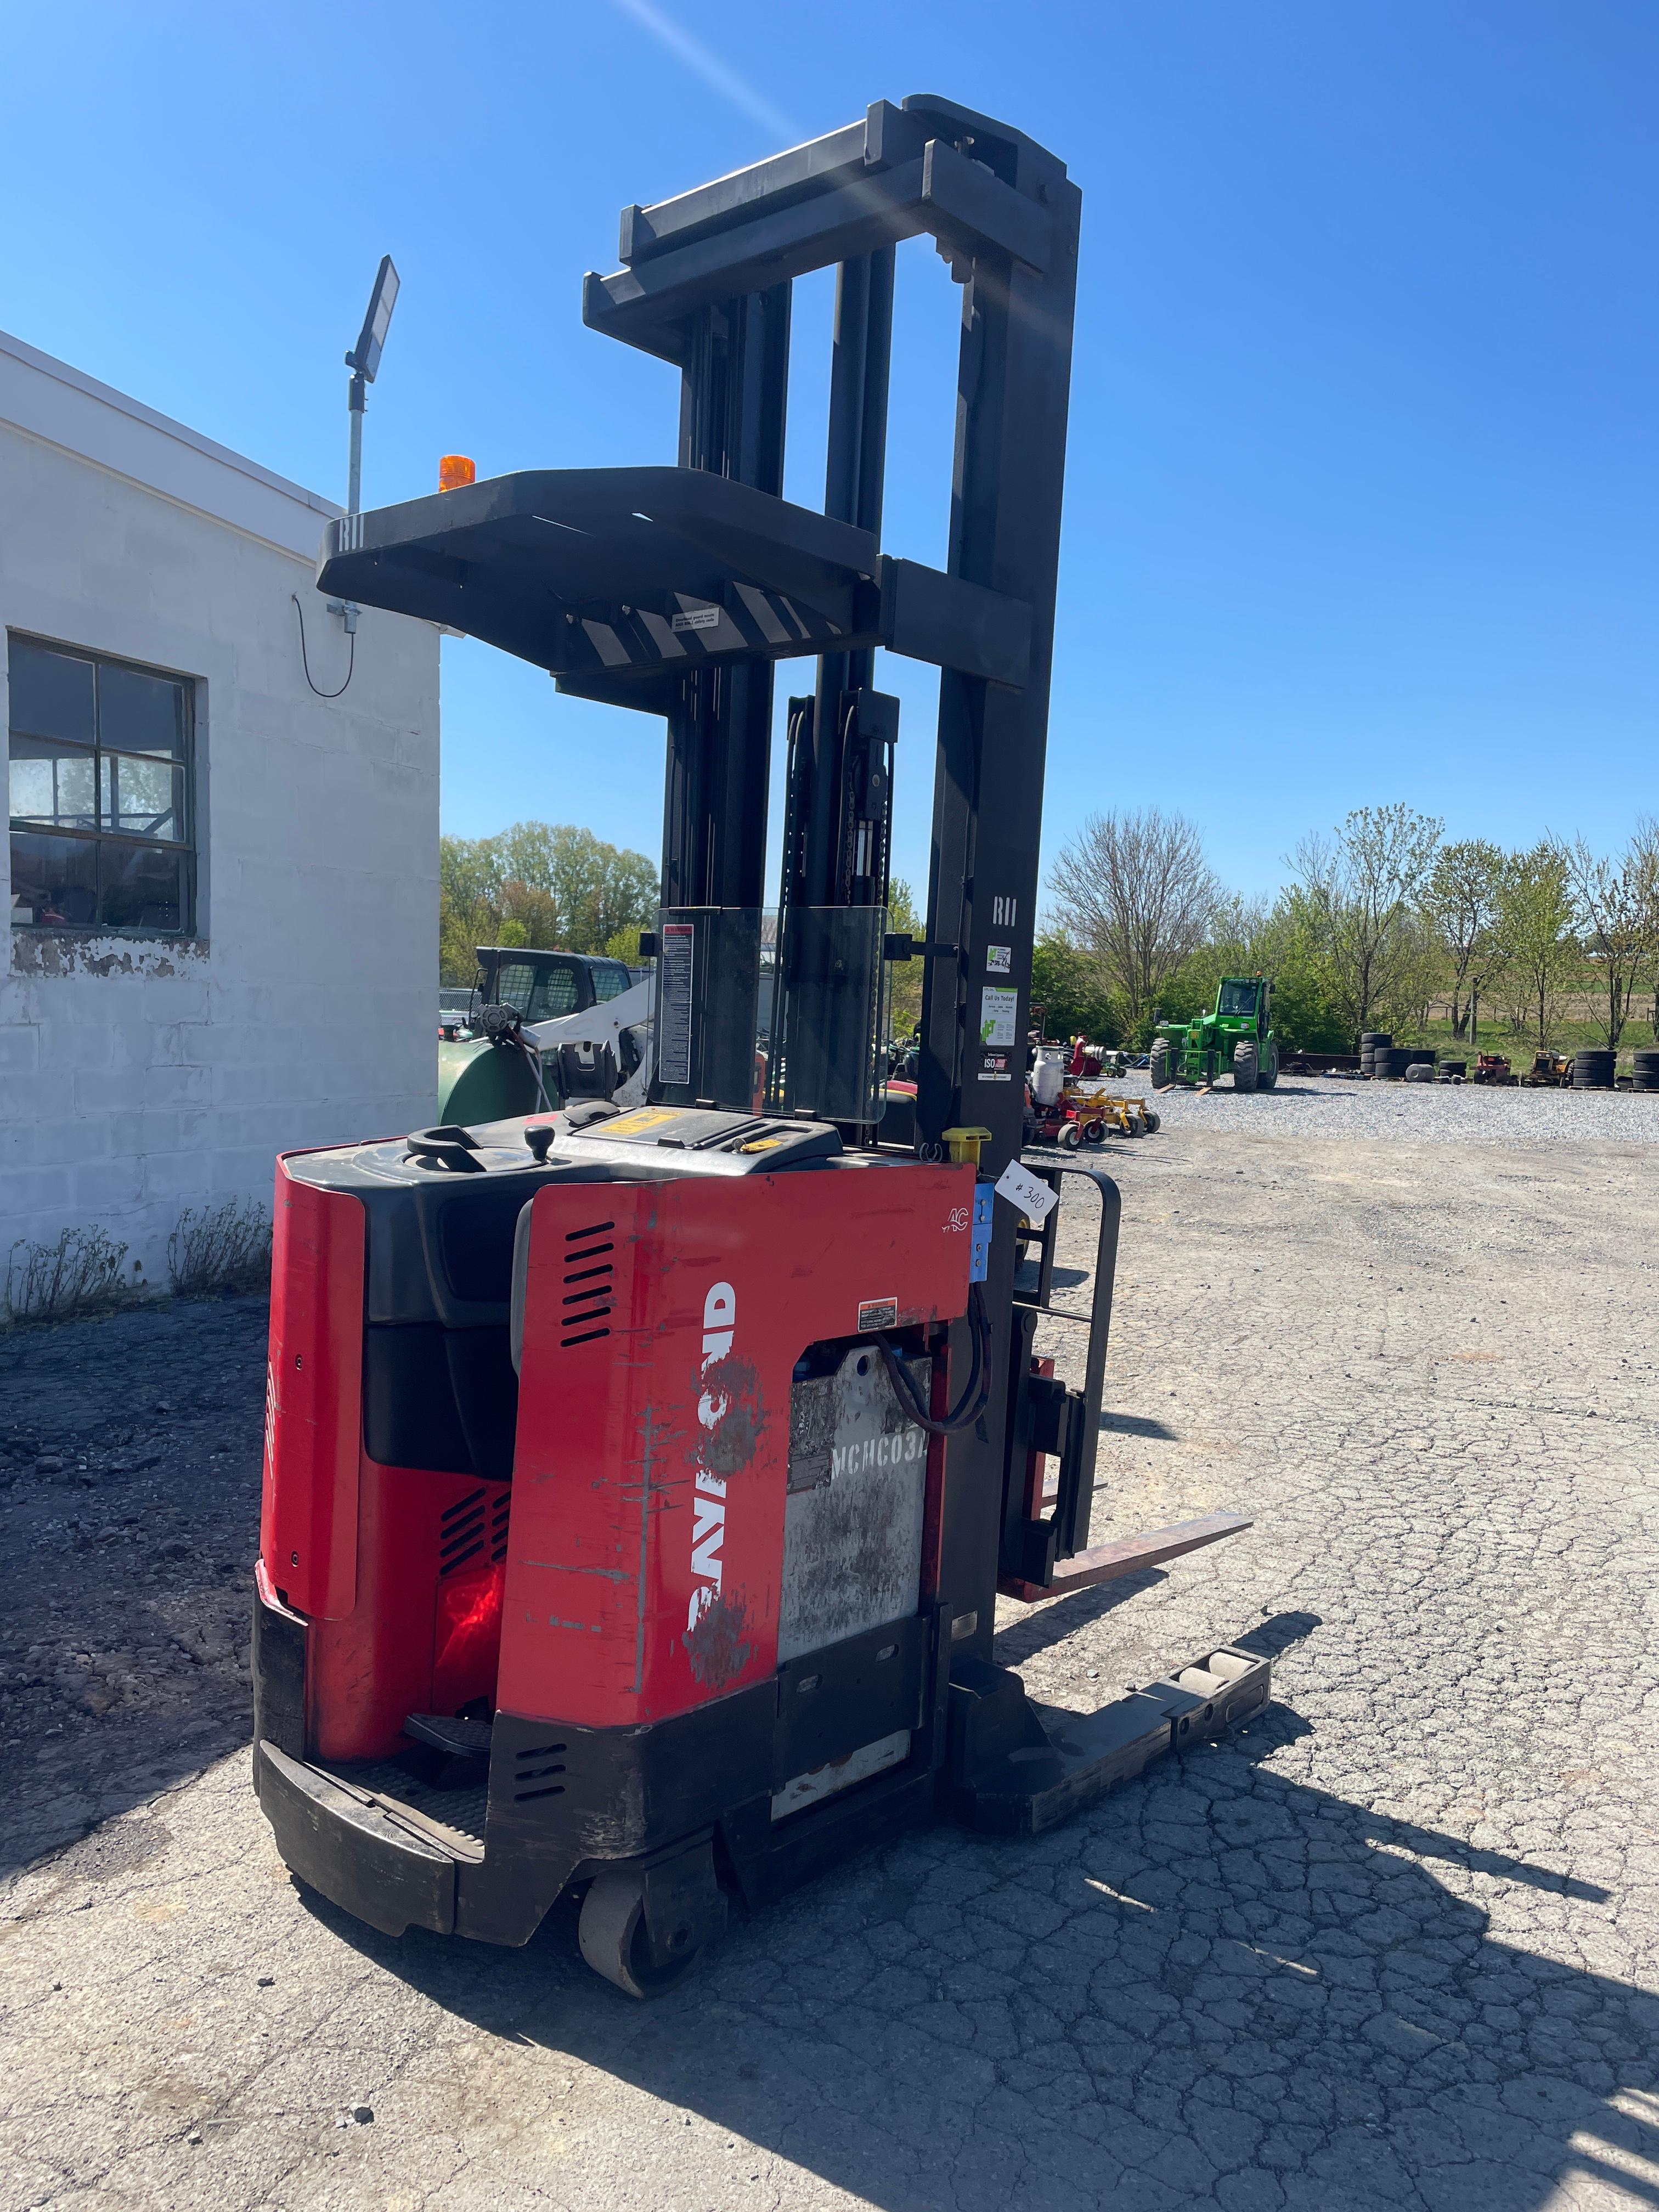 Raymond 3000 Lb. Electric Stand On Reach Truck